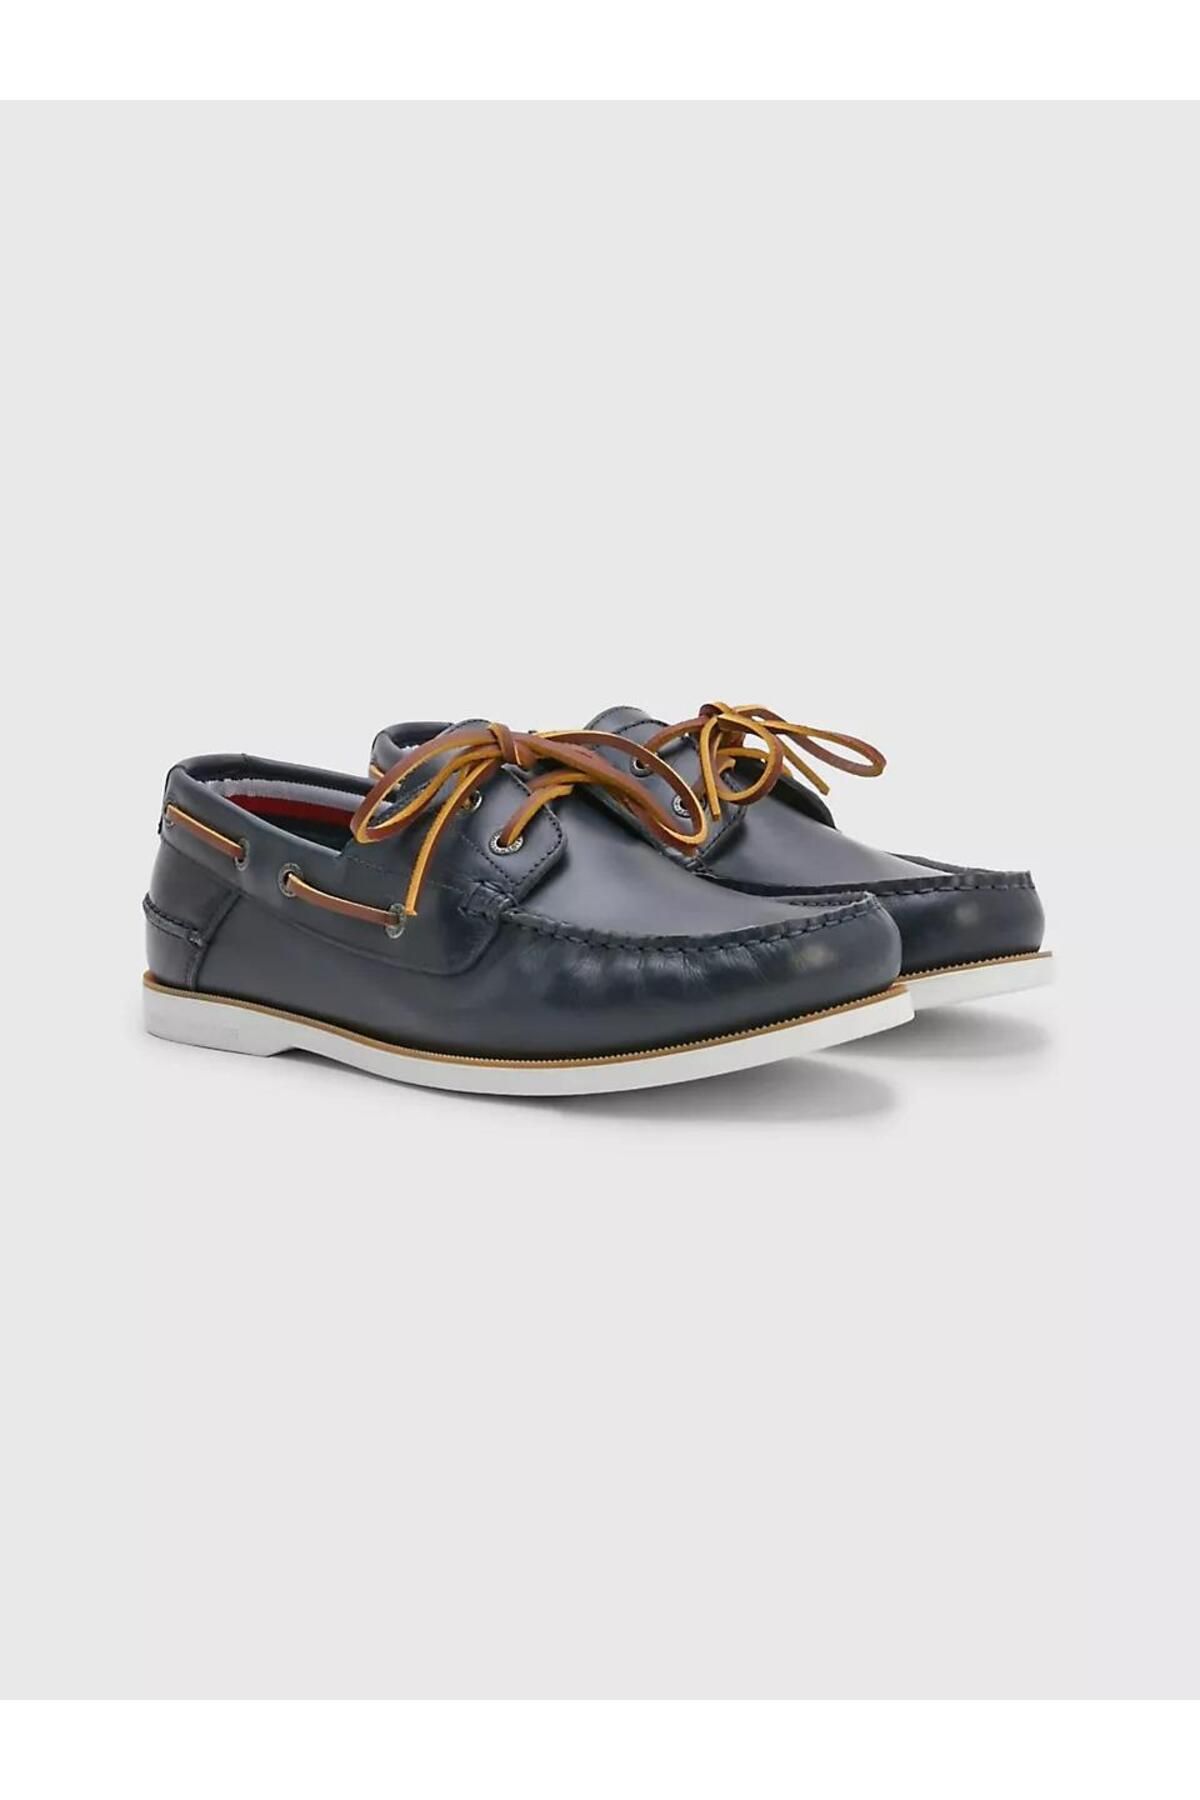 Tommy Hilfiger TH BOAT SHOE CORE LEATHER